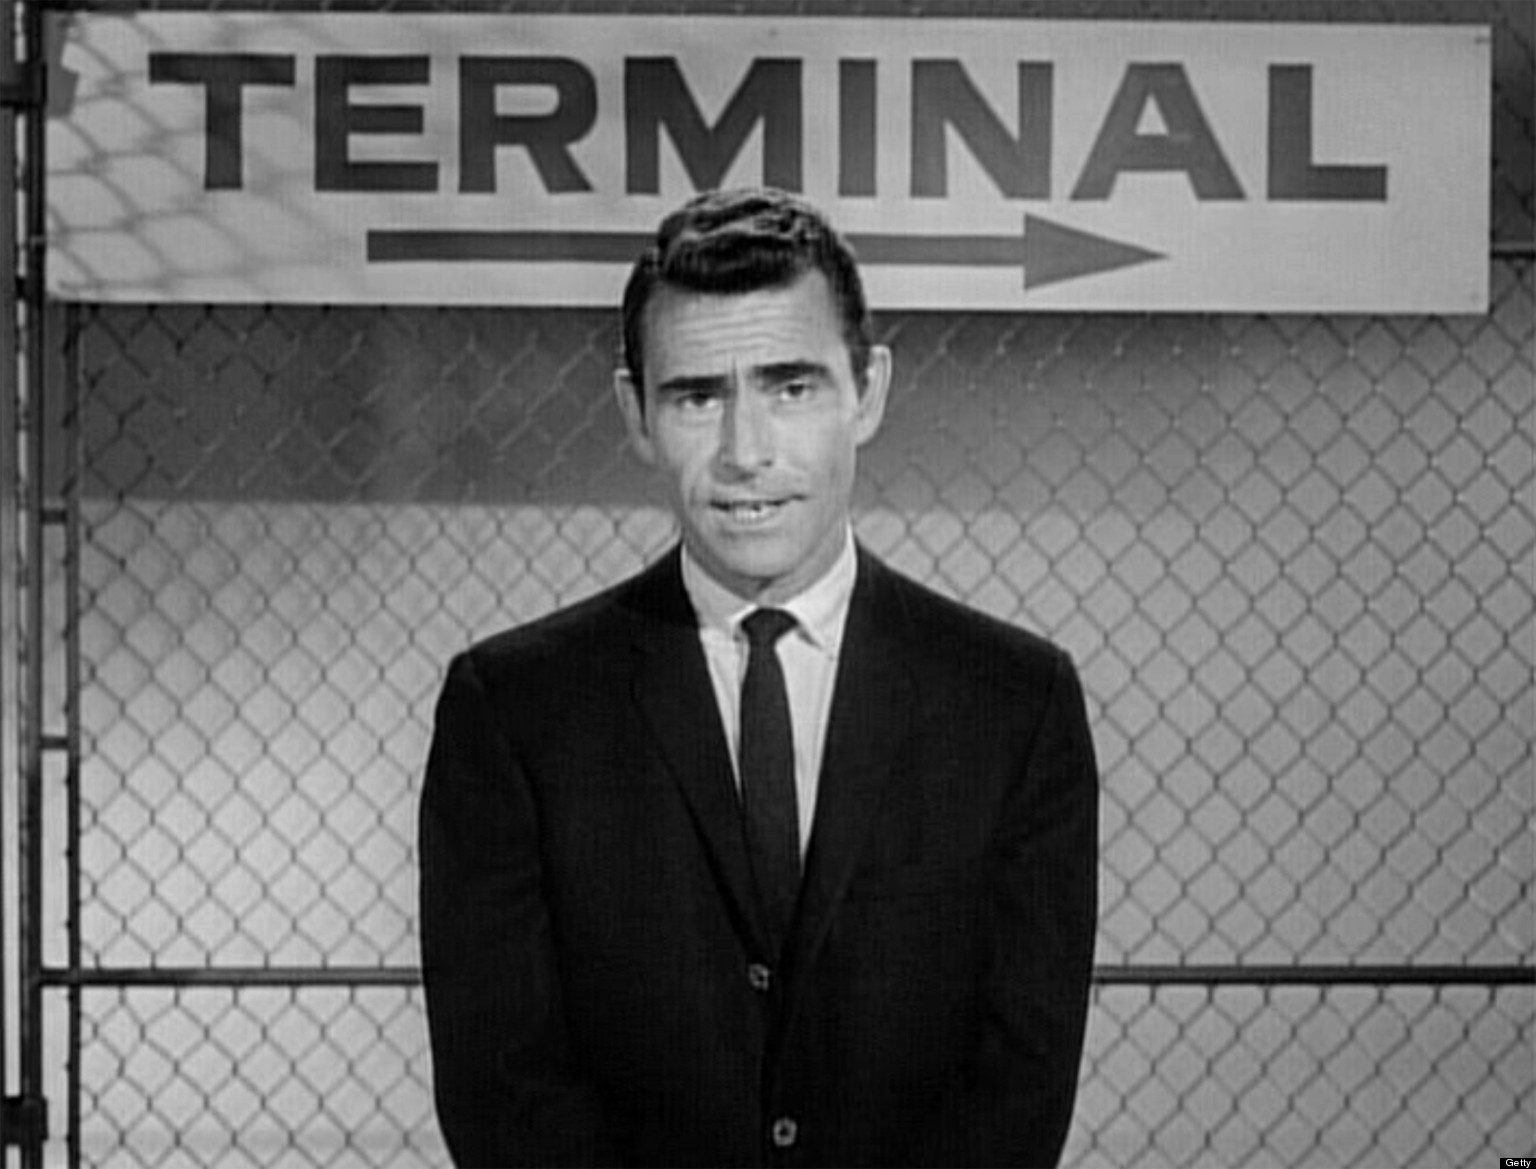 Rod Serling, creator of the television series The Twilight Zone, standing in front of a sign that says 'Terminal'.